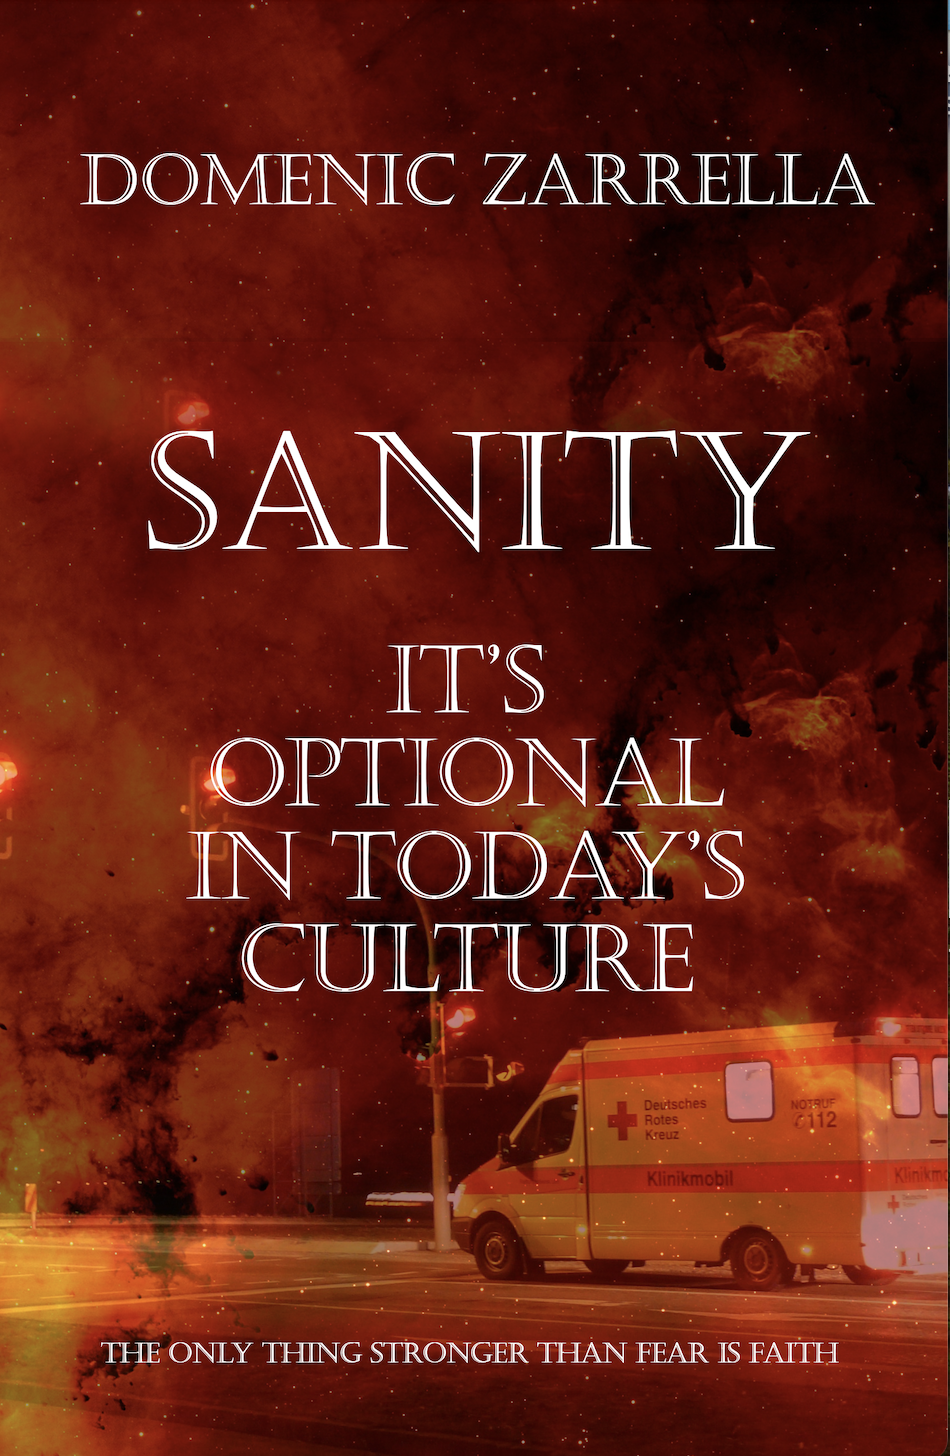 Sanity: It’s Optional in Today’s Culture  by Domenic Zarrella